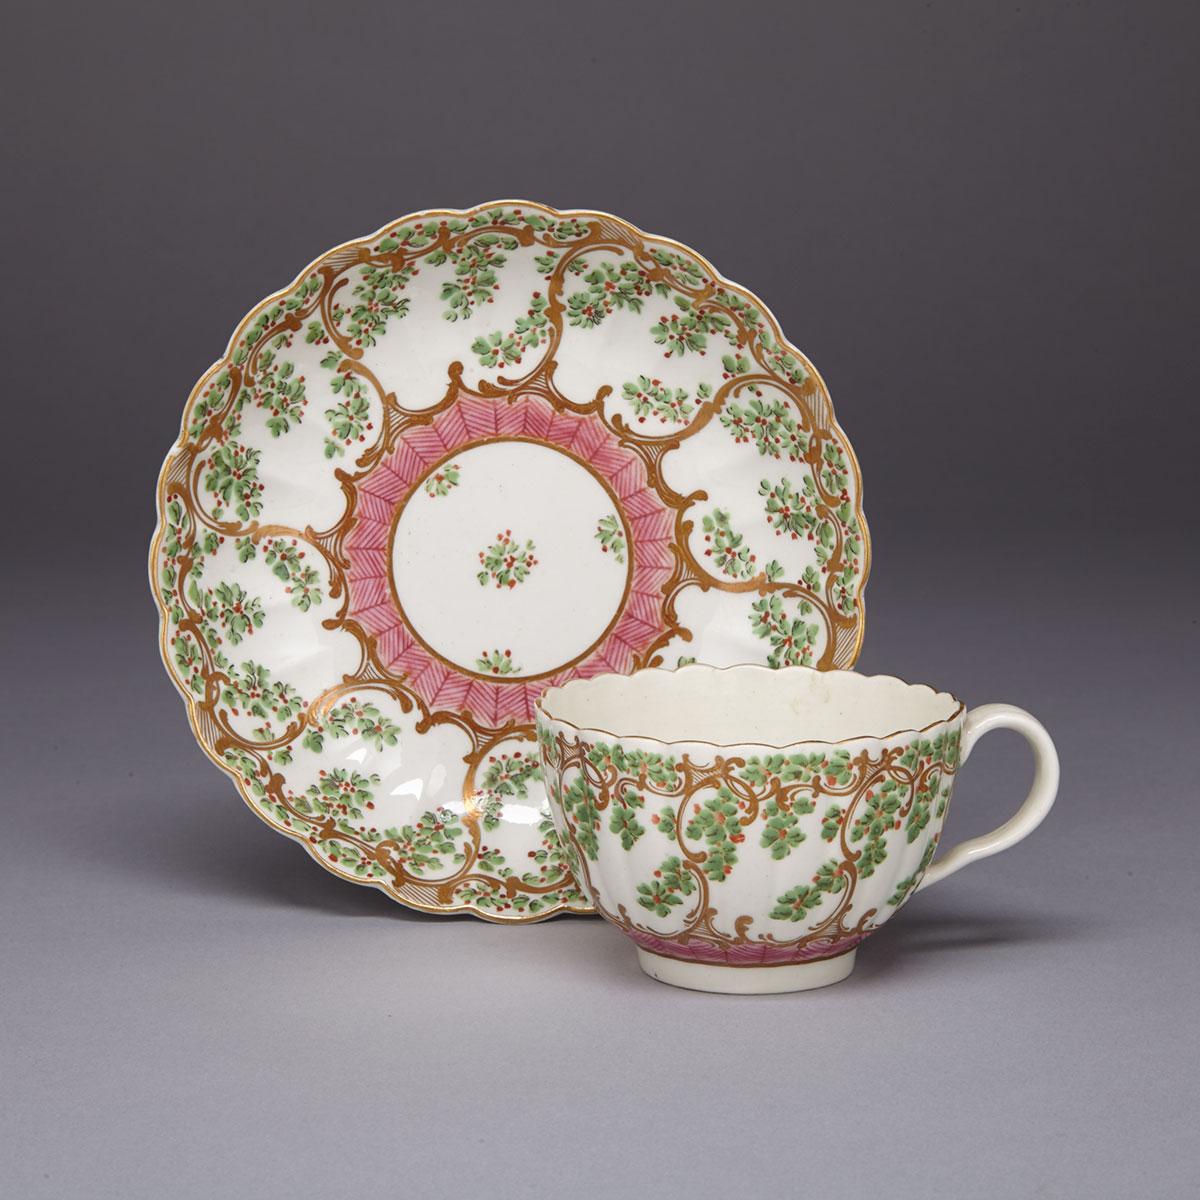 Worcester ‘Hop Trellis’ Fluted Cup and Saucer, c.1770-75